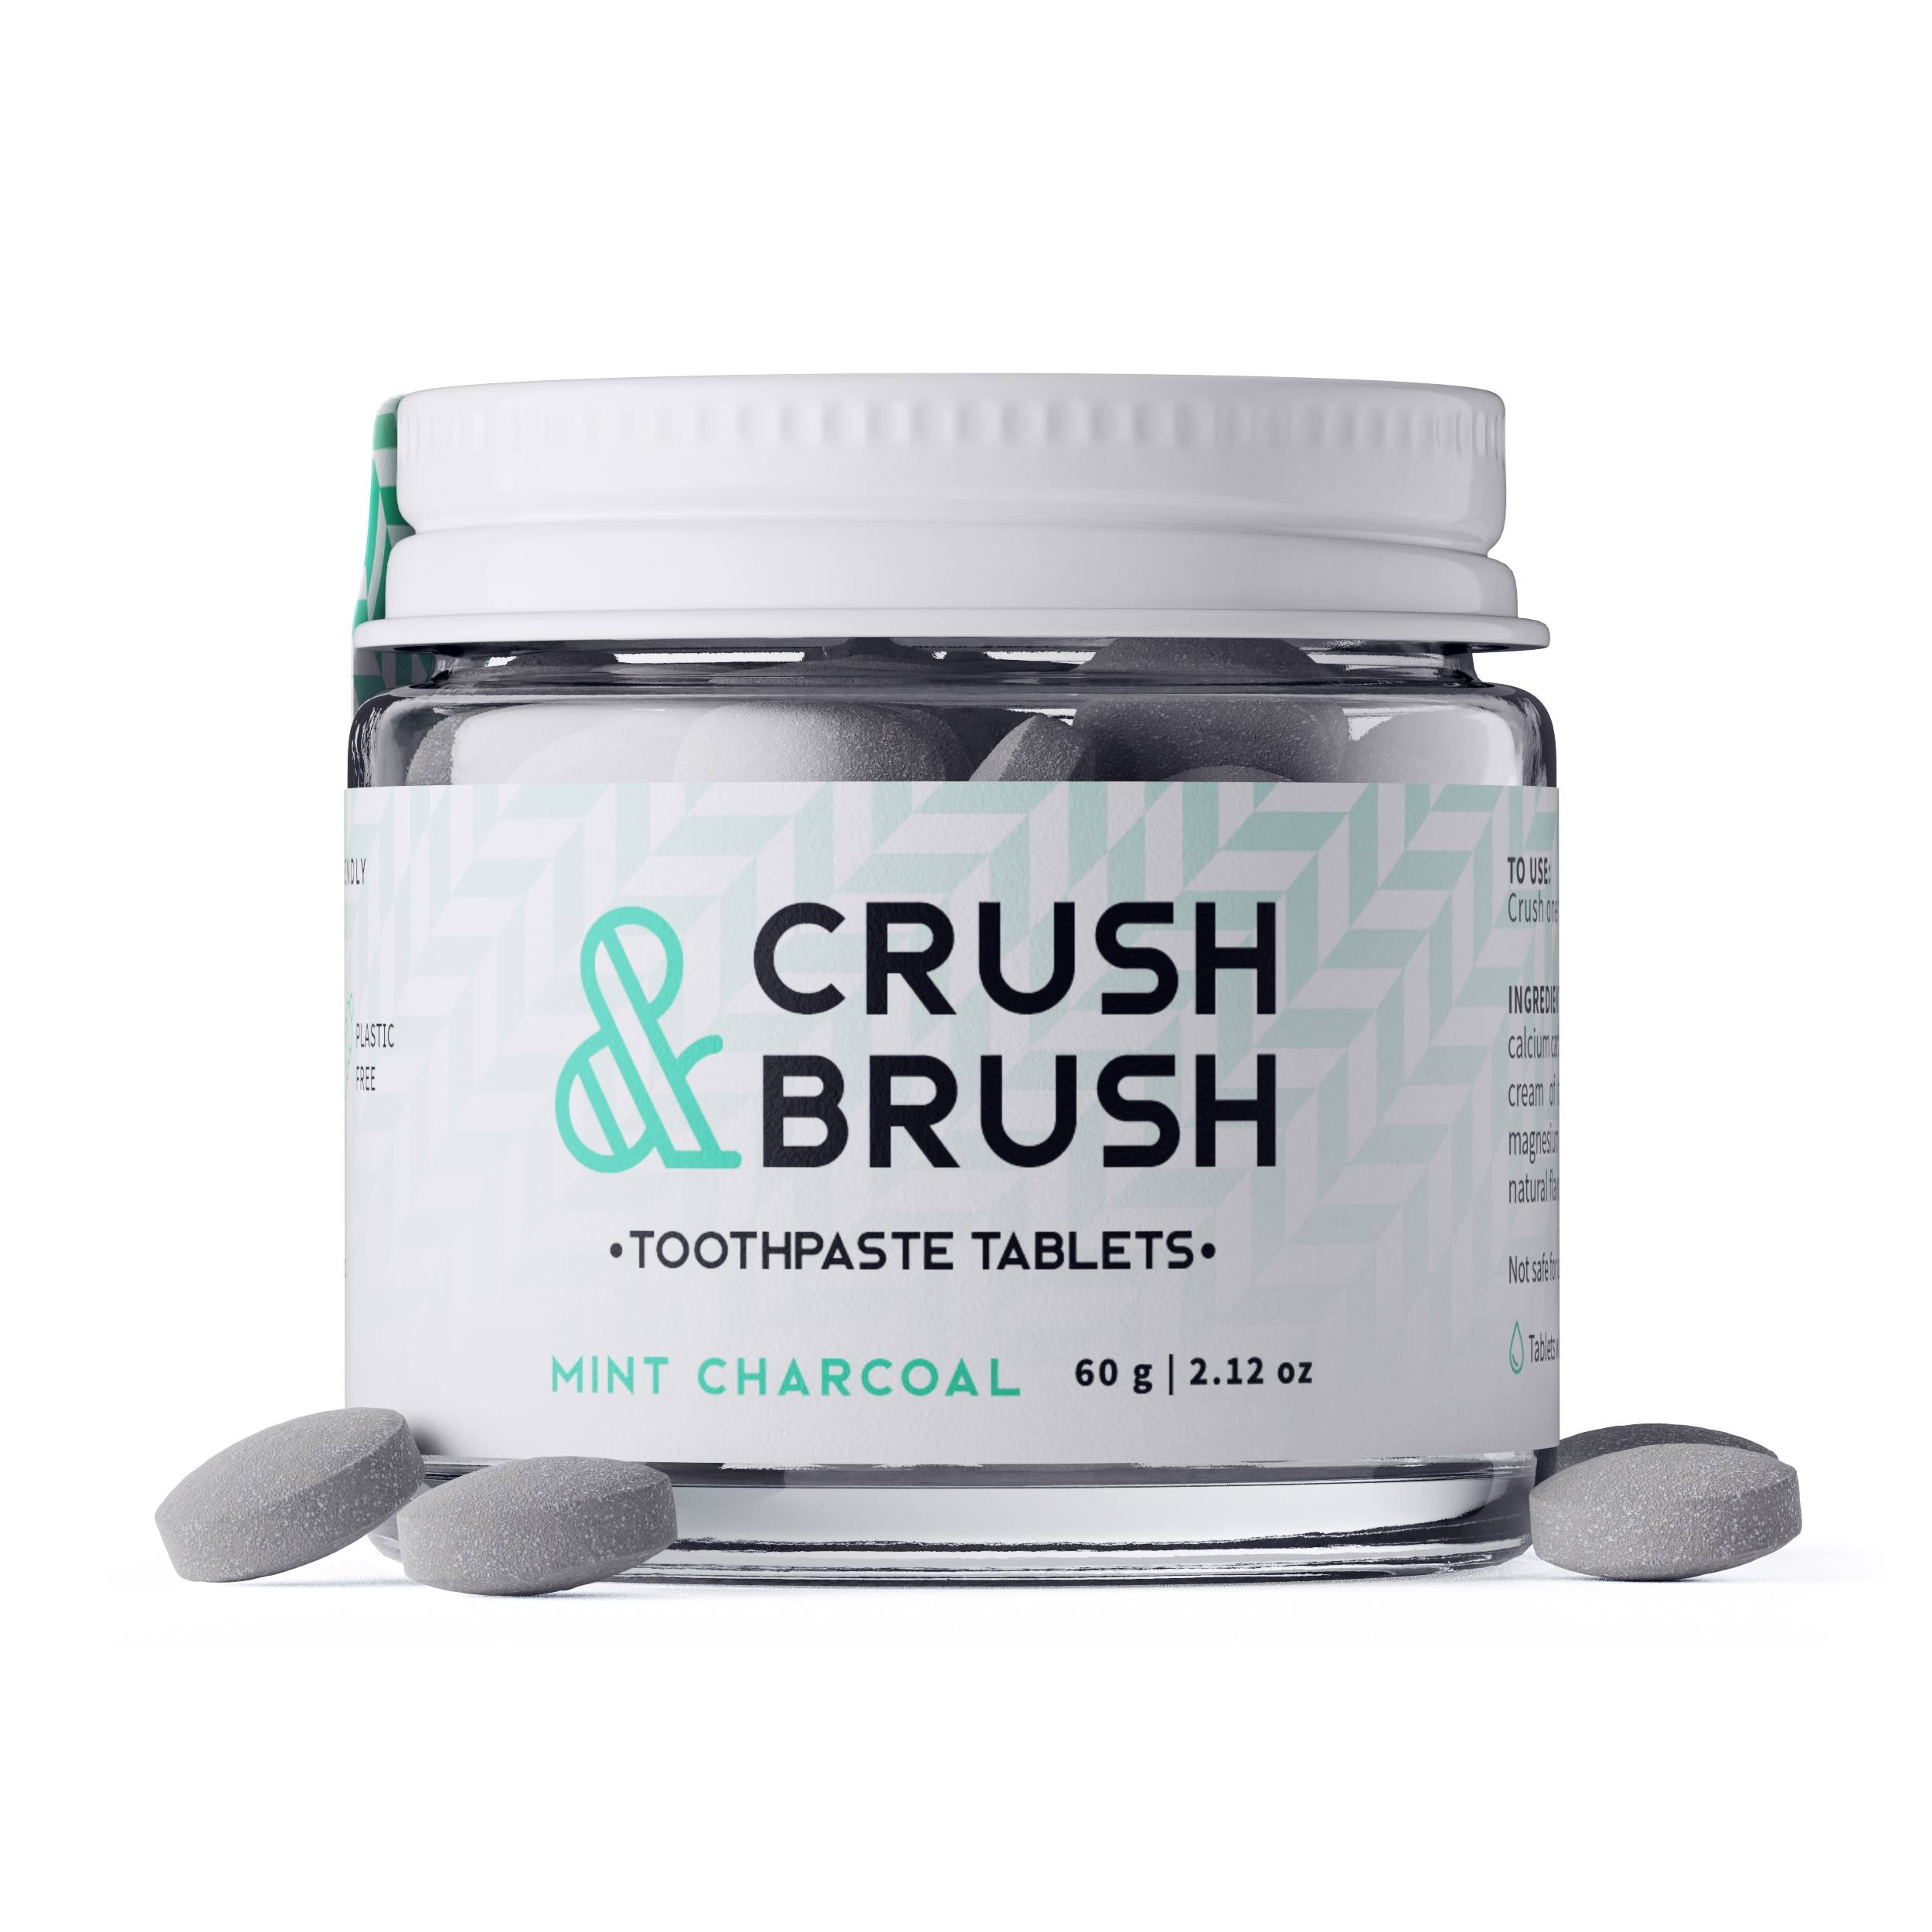 Nelson Naturals Toothpaste Tablets Crush & Brush Mint Charcoal 60g